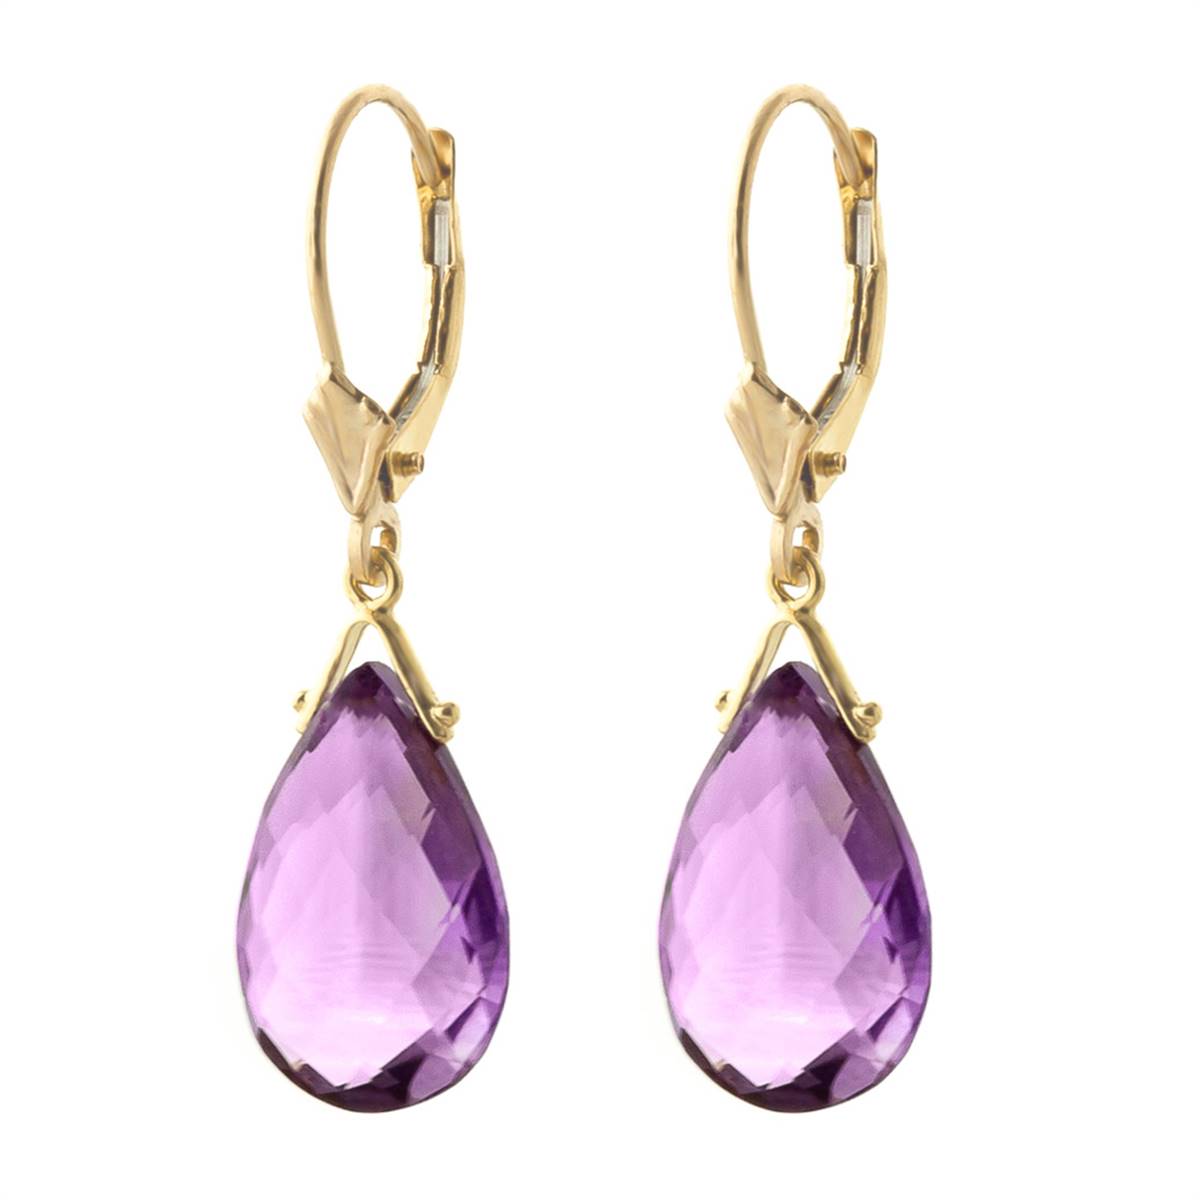 10.2 Carat 14K Solid Yellow Gold Fortune Amethyst Earrings